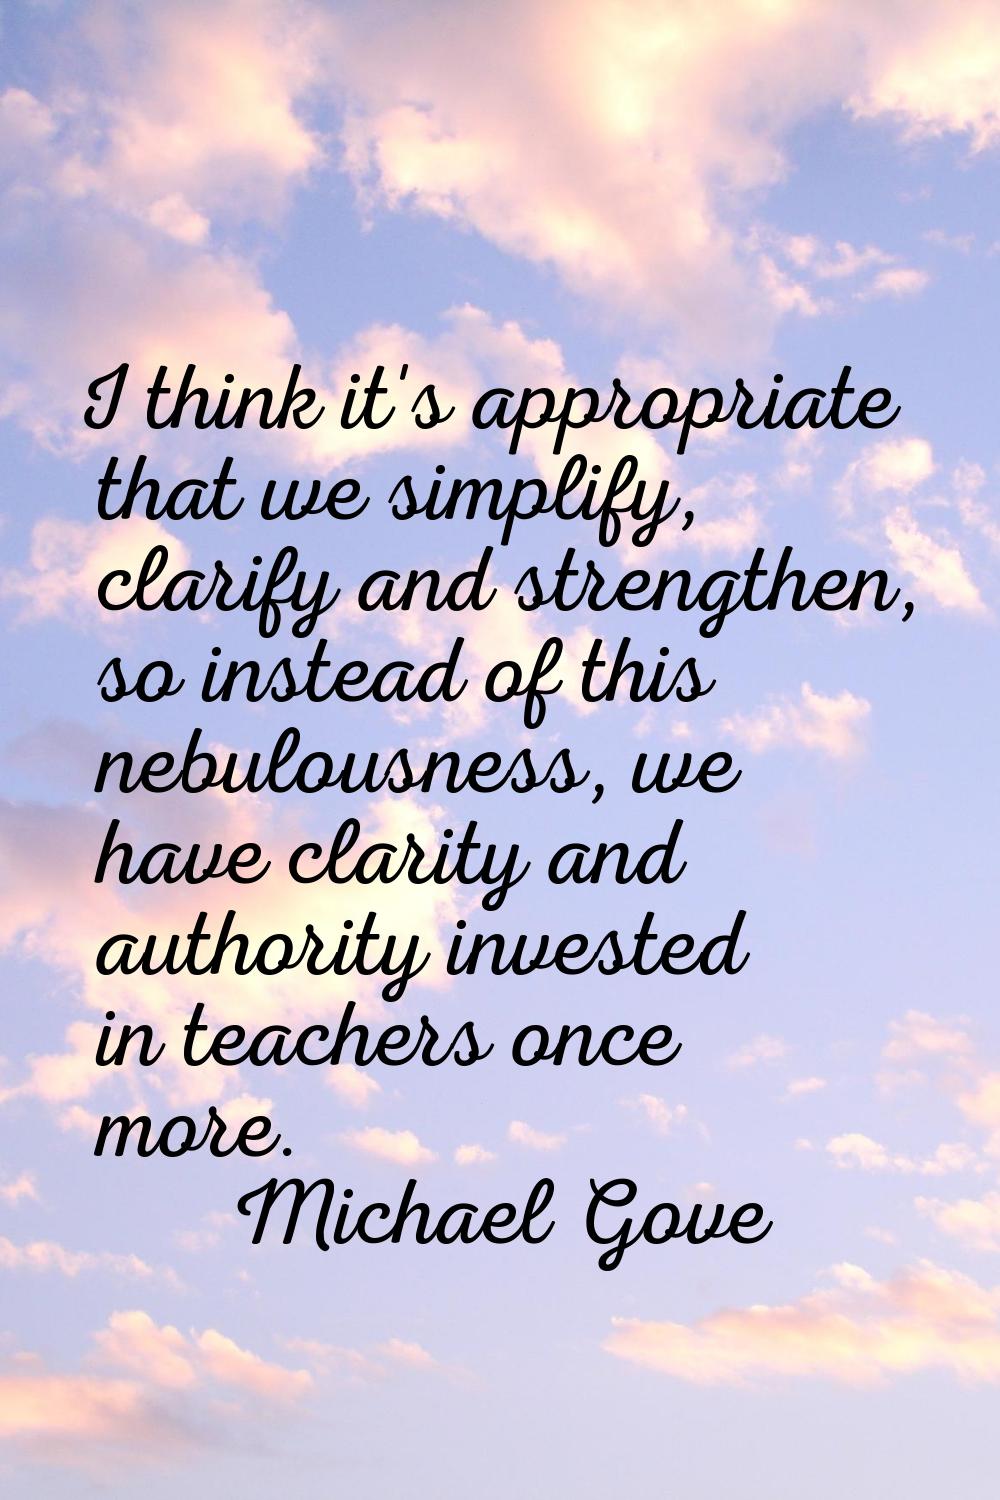 I think it's appropriate that we simplify, clarify and strengthen, so instead of this nebulousness,